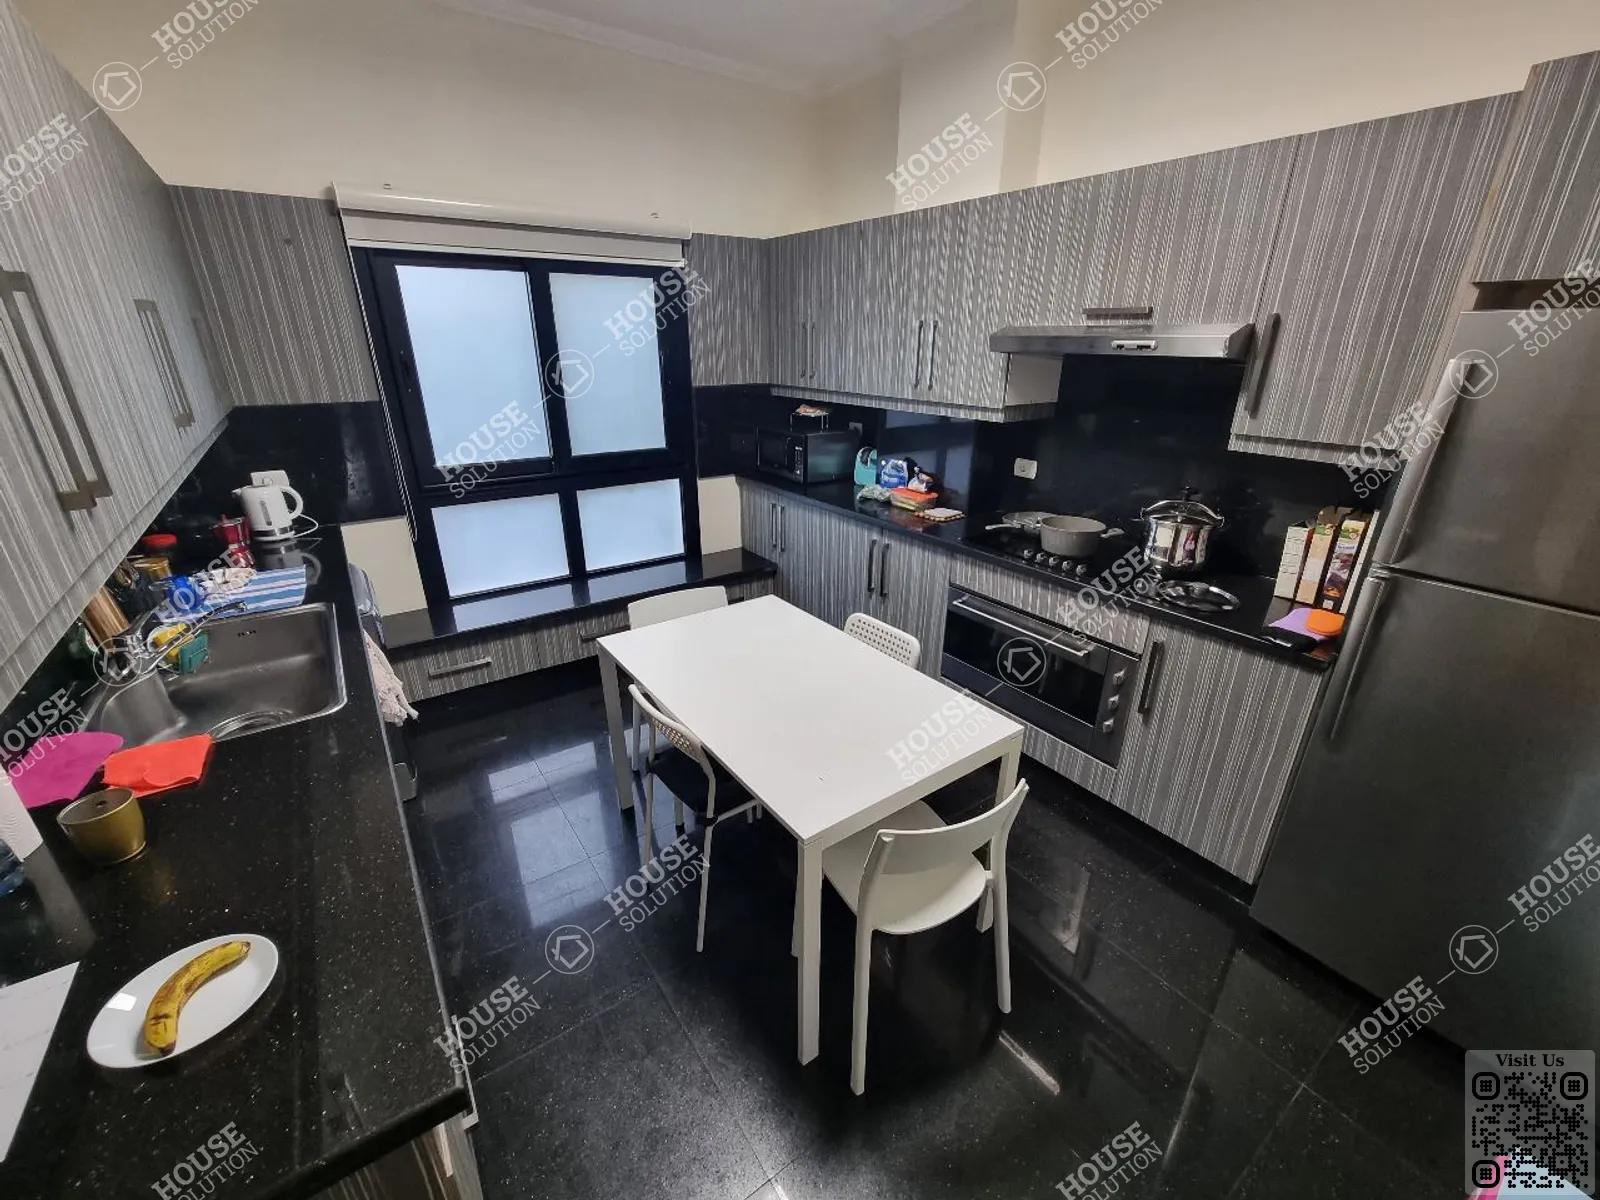 KITCHEN  @ Apartments For Rent In Maadi Maadi Sarayat Area: 350 m² consists of 4 Bedrooms 4 Bathrooms Modern furnished 5 stars #5472-1